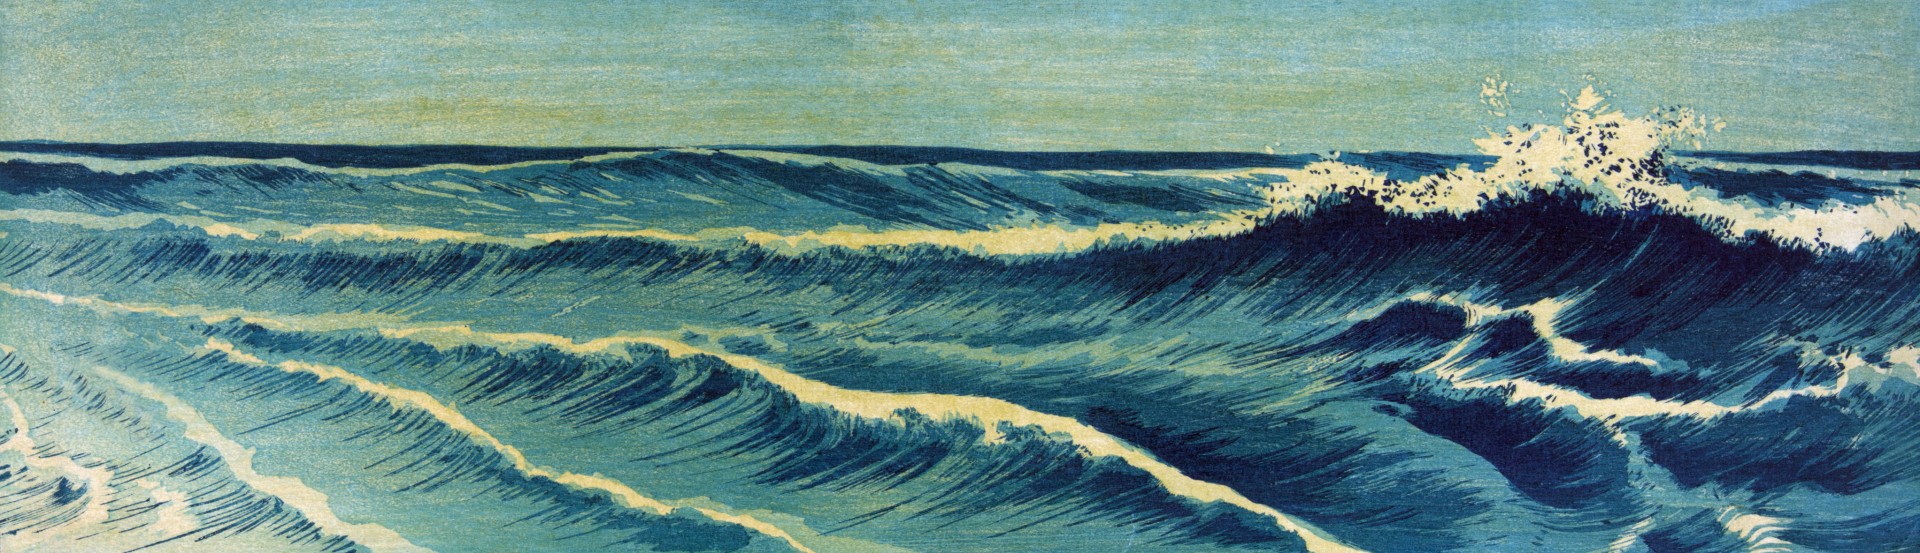 Vintage public domain Japanese sea and waves illustration, available from the Library of Congress.